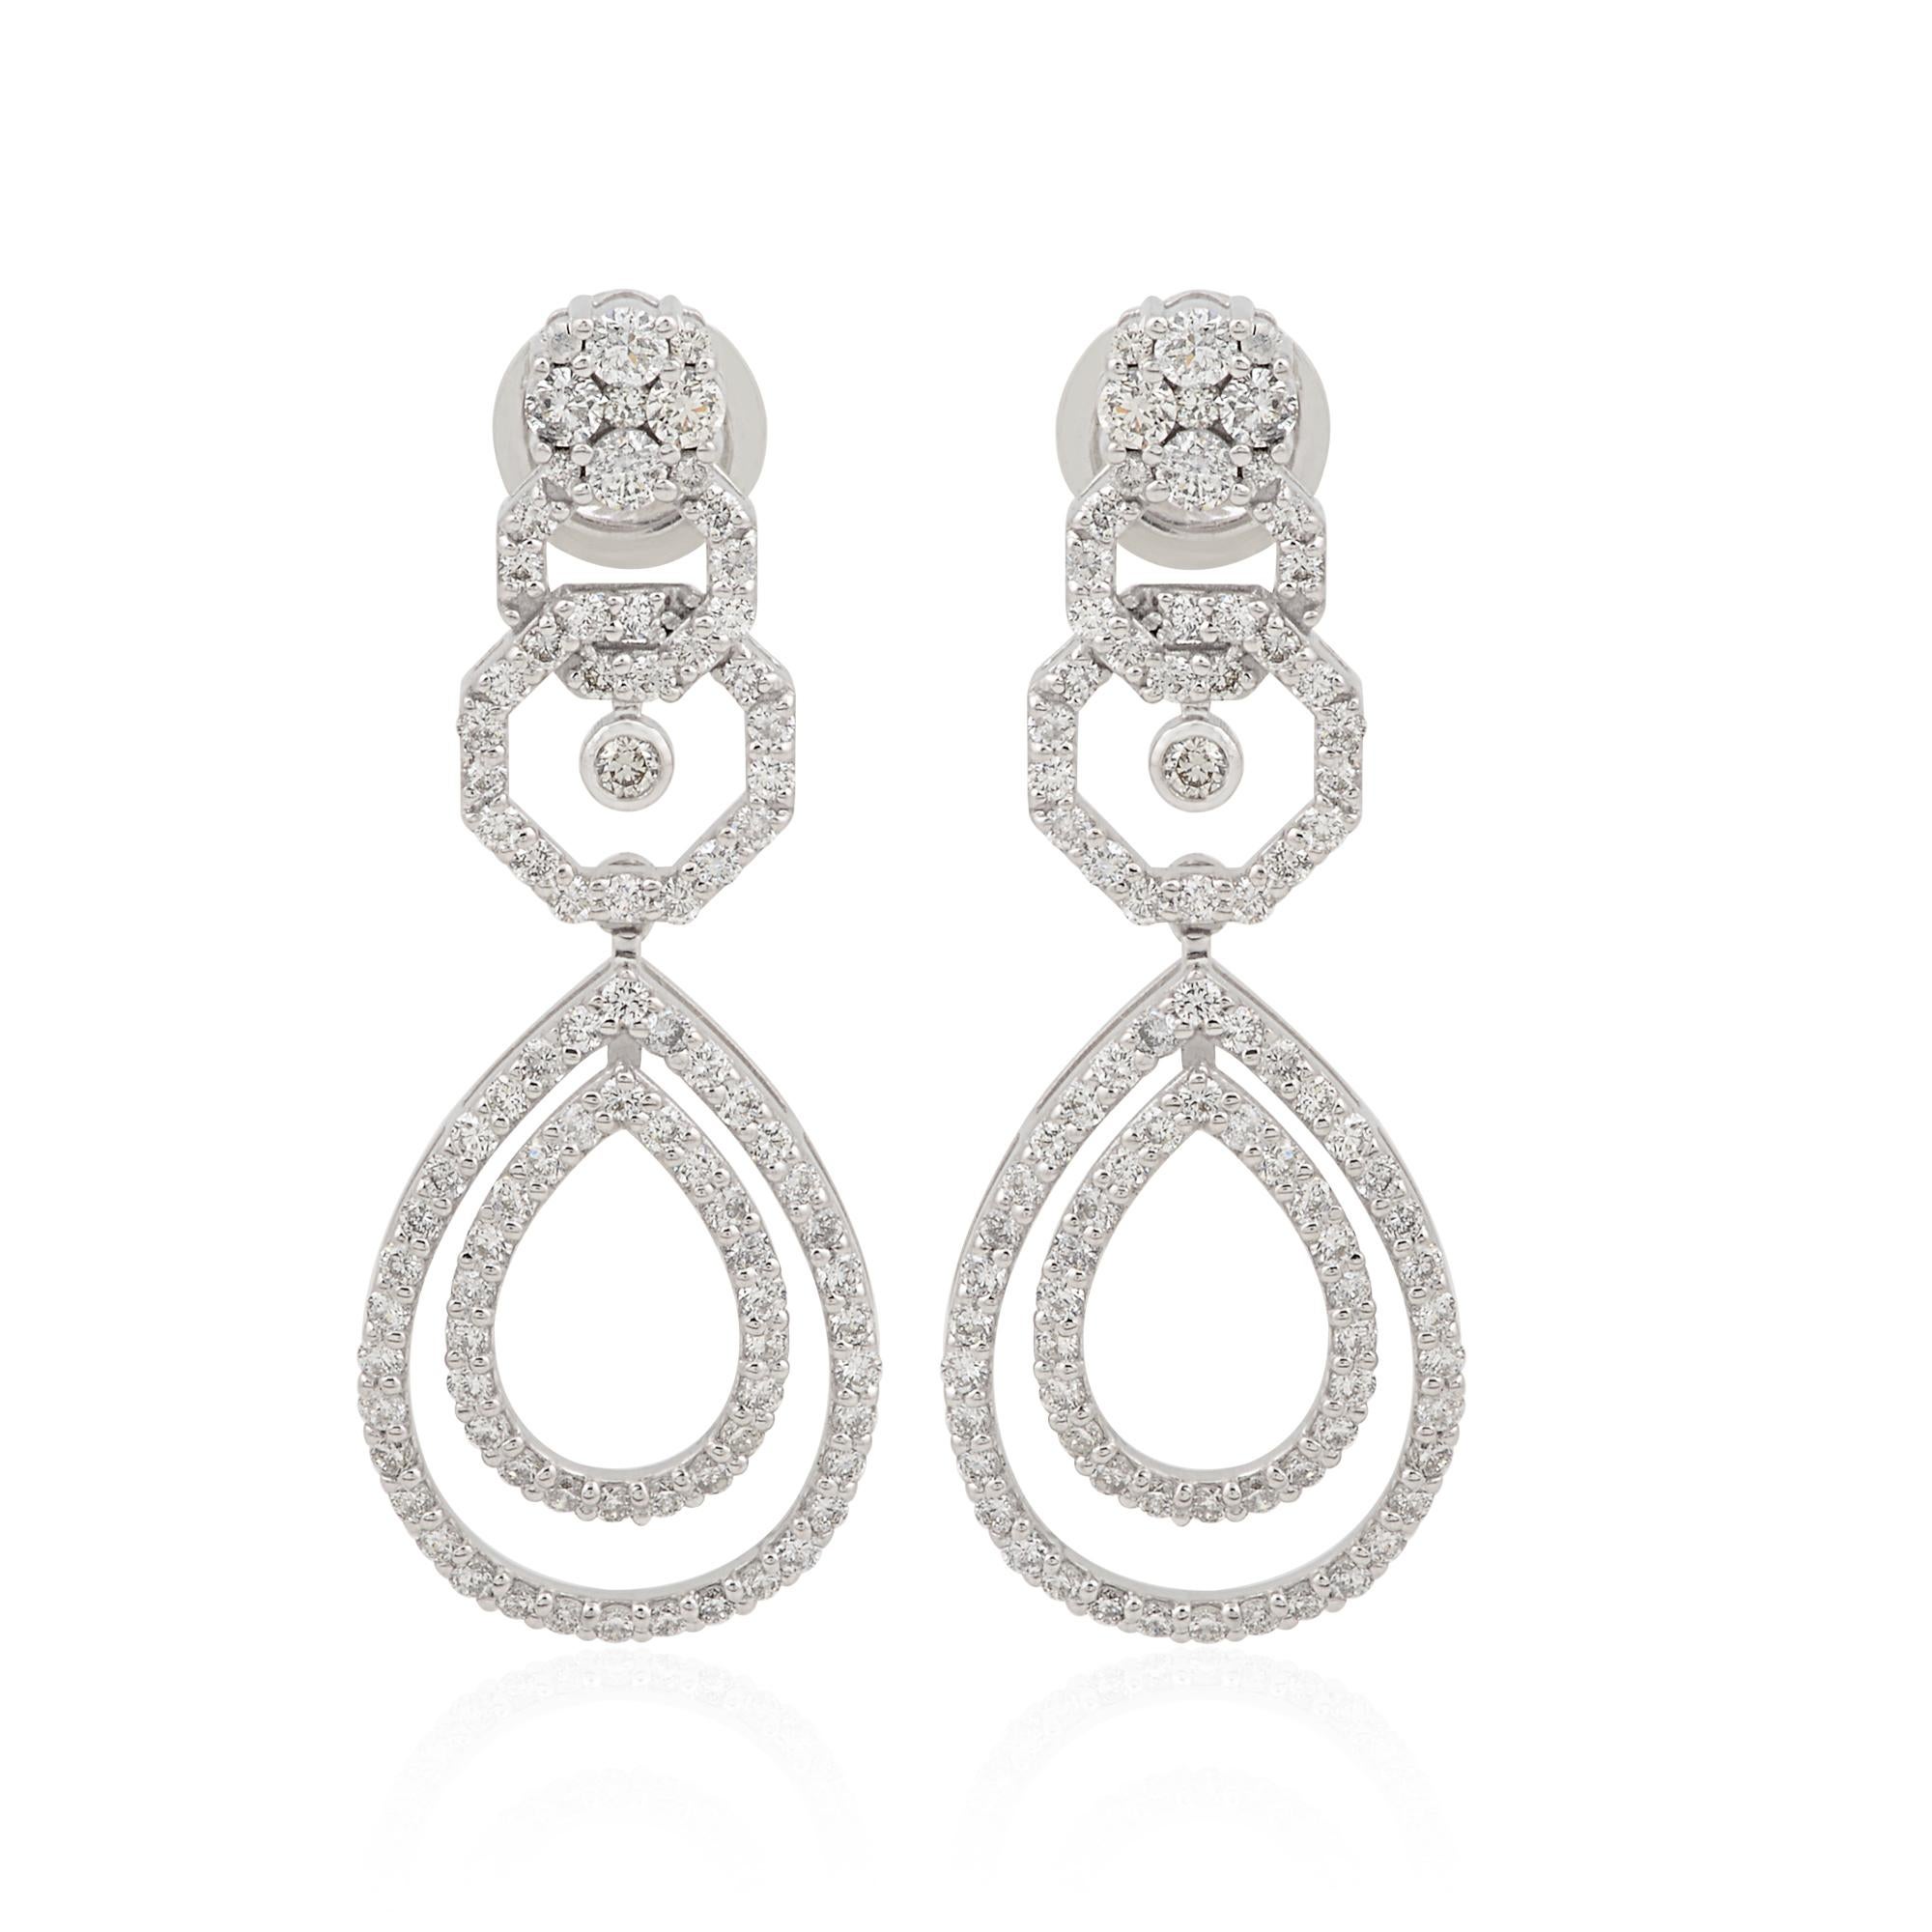 Item Code :- STE-1129
Gross Wt. :- 5.69 gm
10k White Gold Wt. :- 5.36 gm
C V D Diamond Wt. :- 1.65 Ct.
Earrings Size :- 35 mm approx.

✦ Sizing
.....................
We can adjust most items to fit your sizing preferences. Most items can be made to